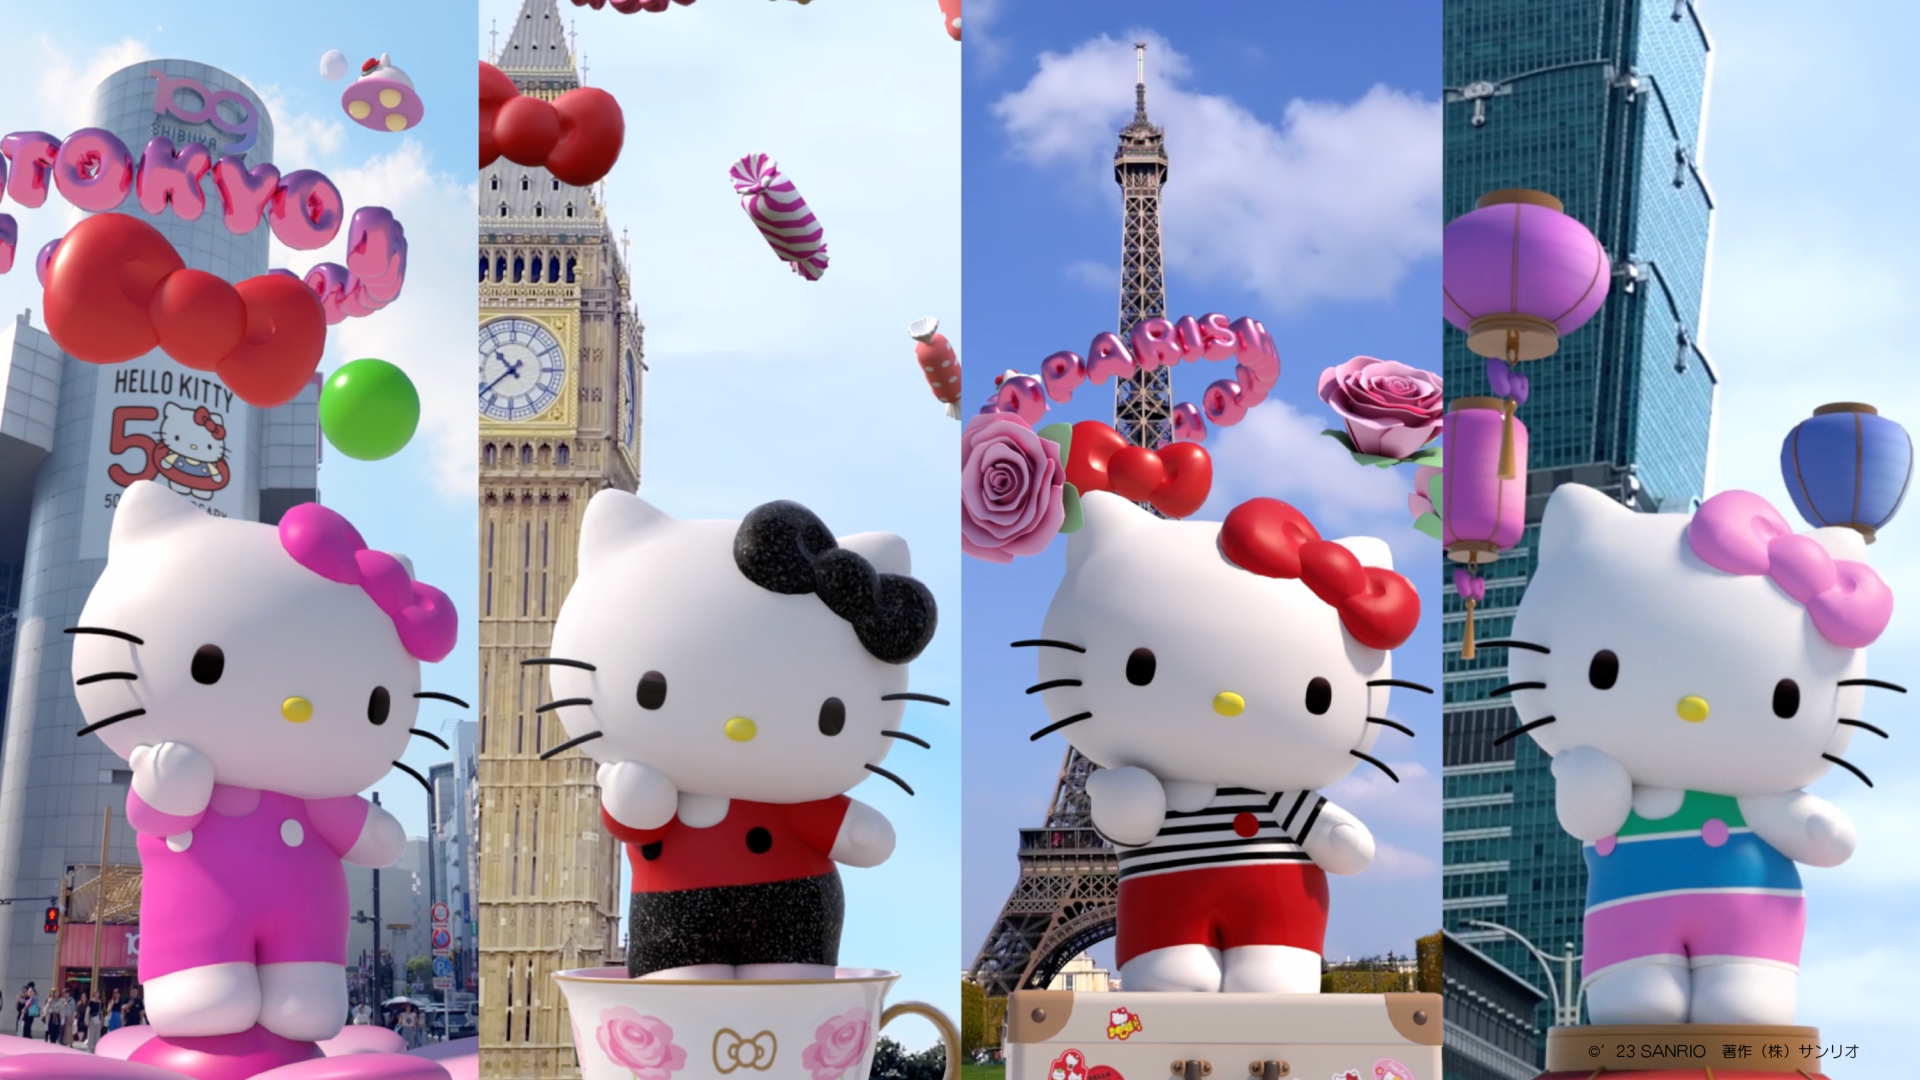 National Hello Kitty Day in USA in 2024